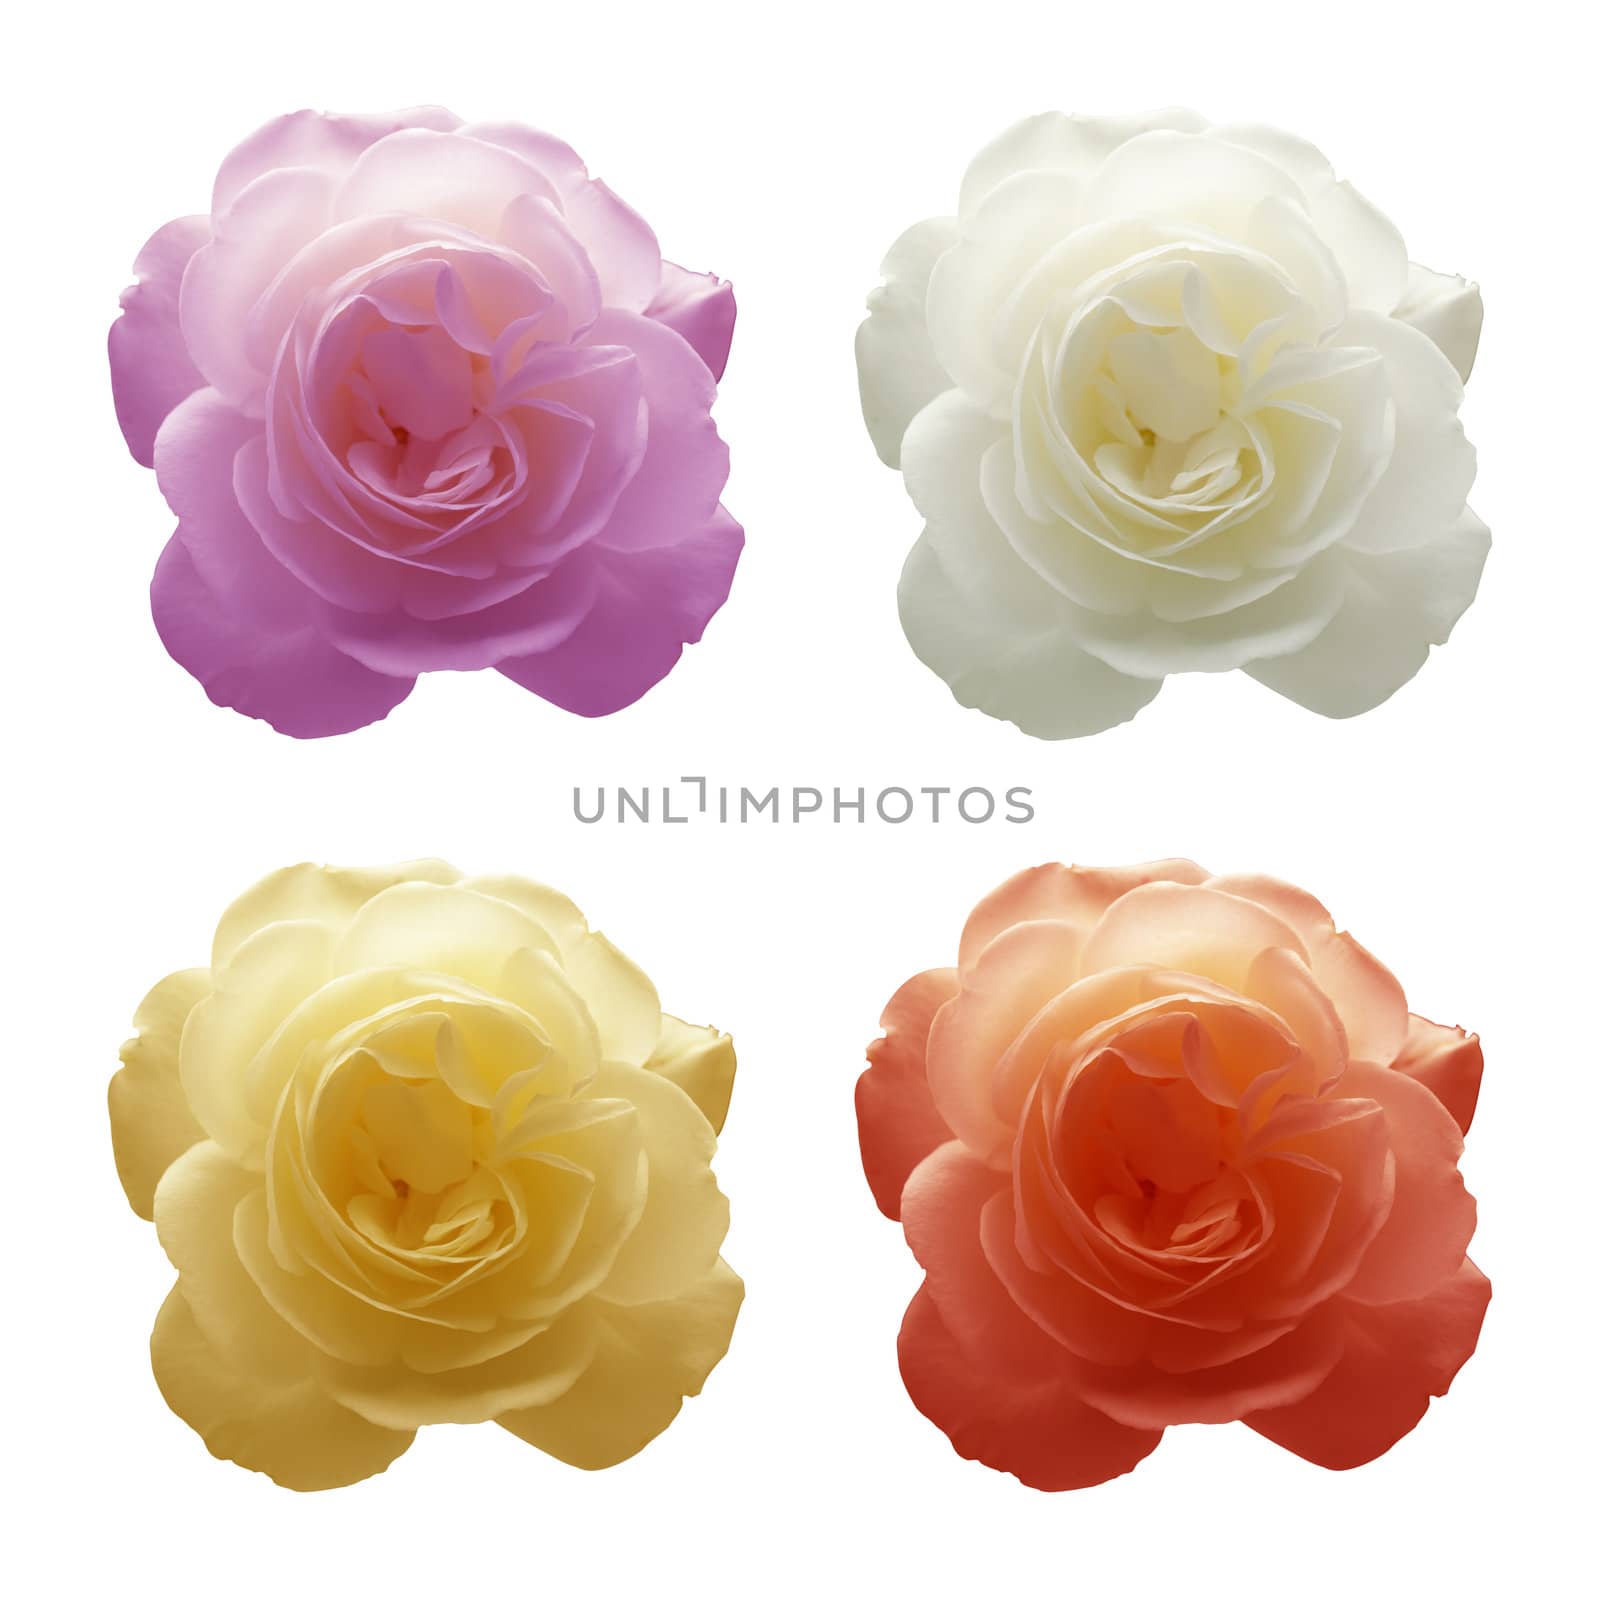 Four roses in four different colors. White, red, yellow and violet. Composition of four images.